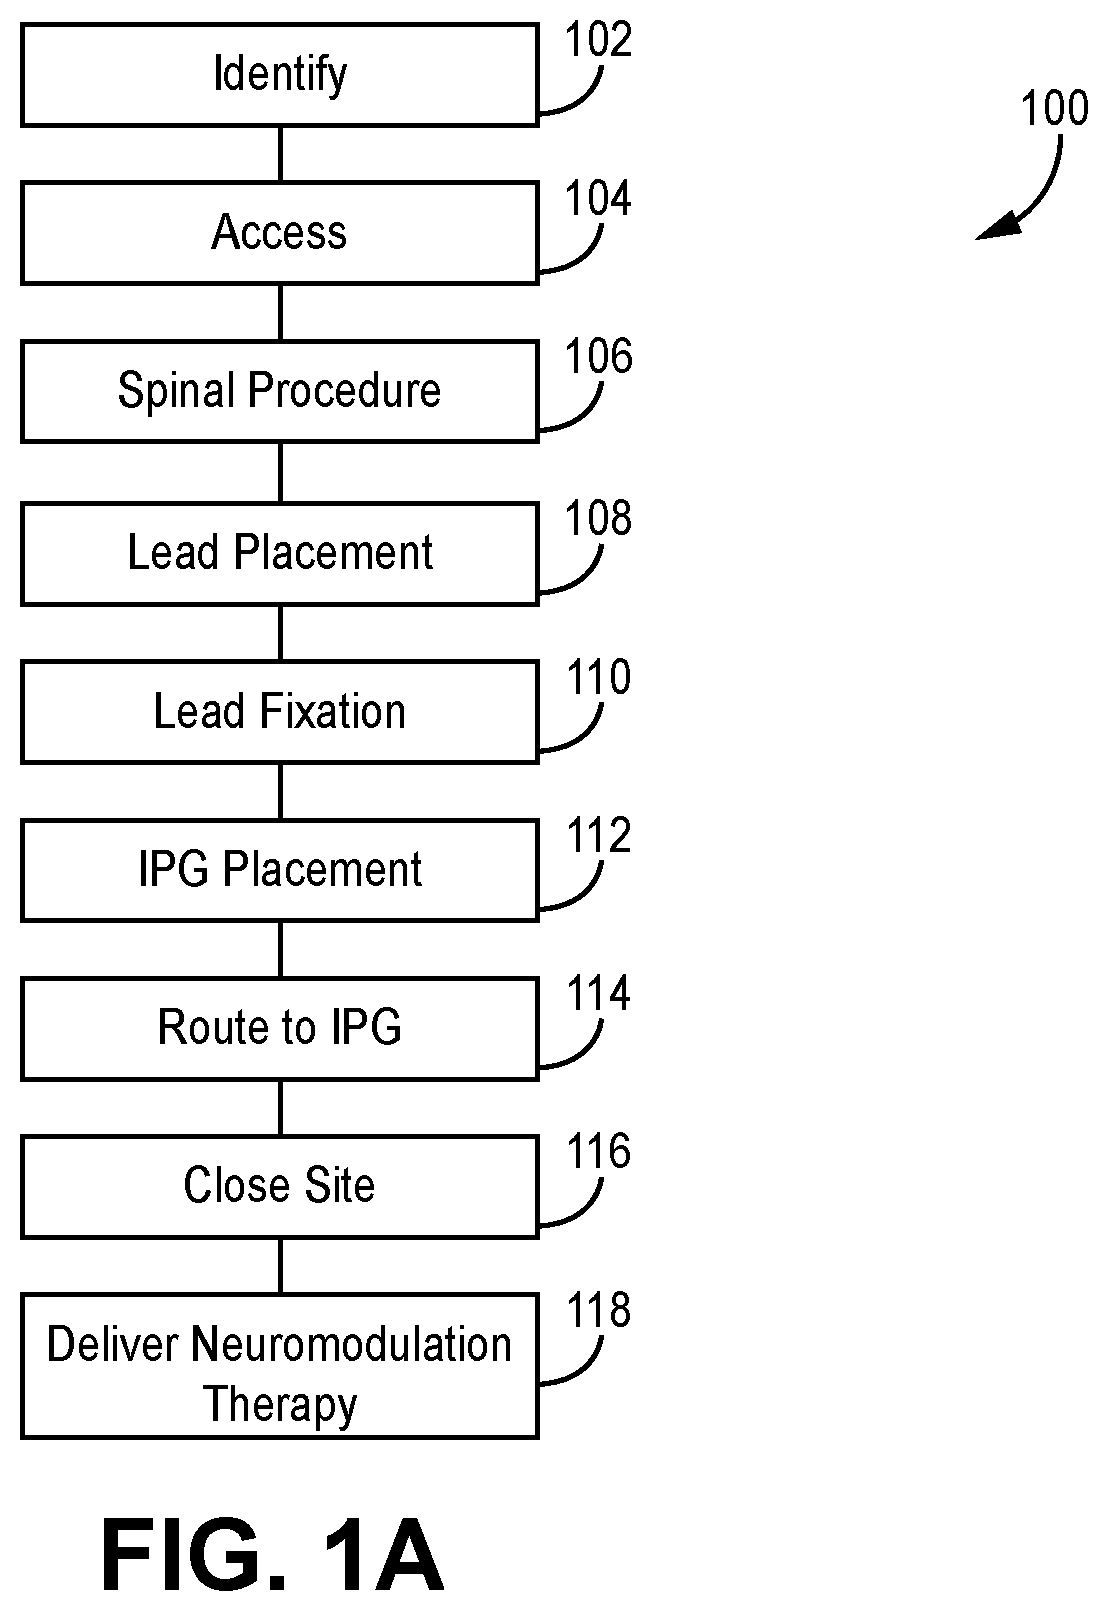 Methods and systems for implanting a neuromodulation system at a surgically open spinal treatment site